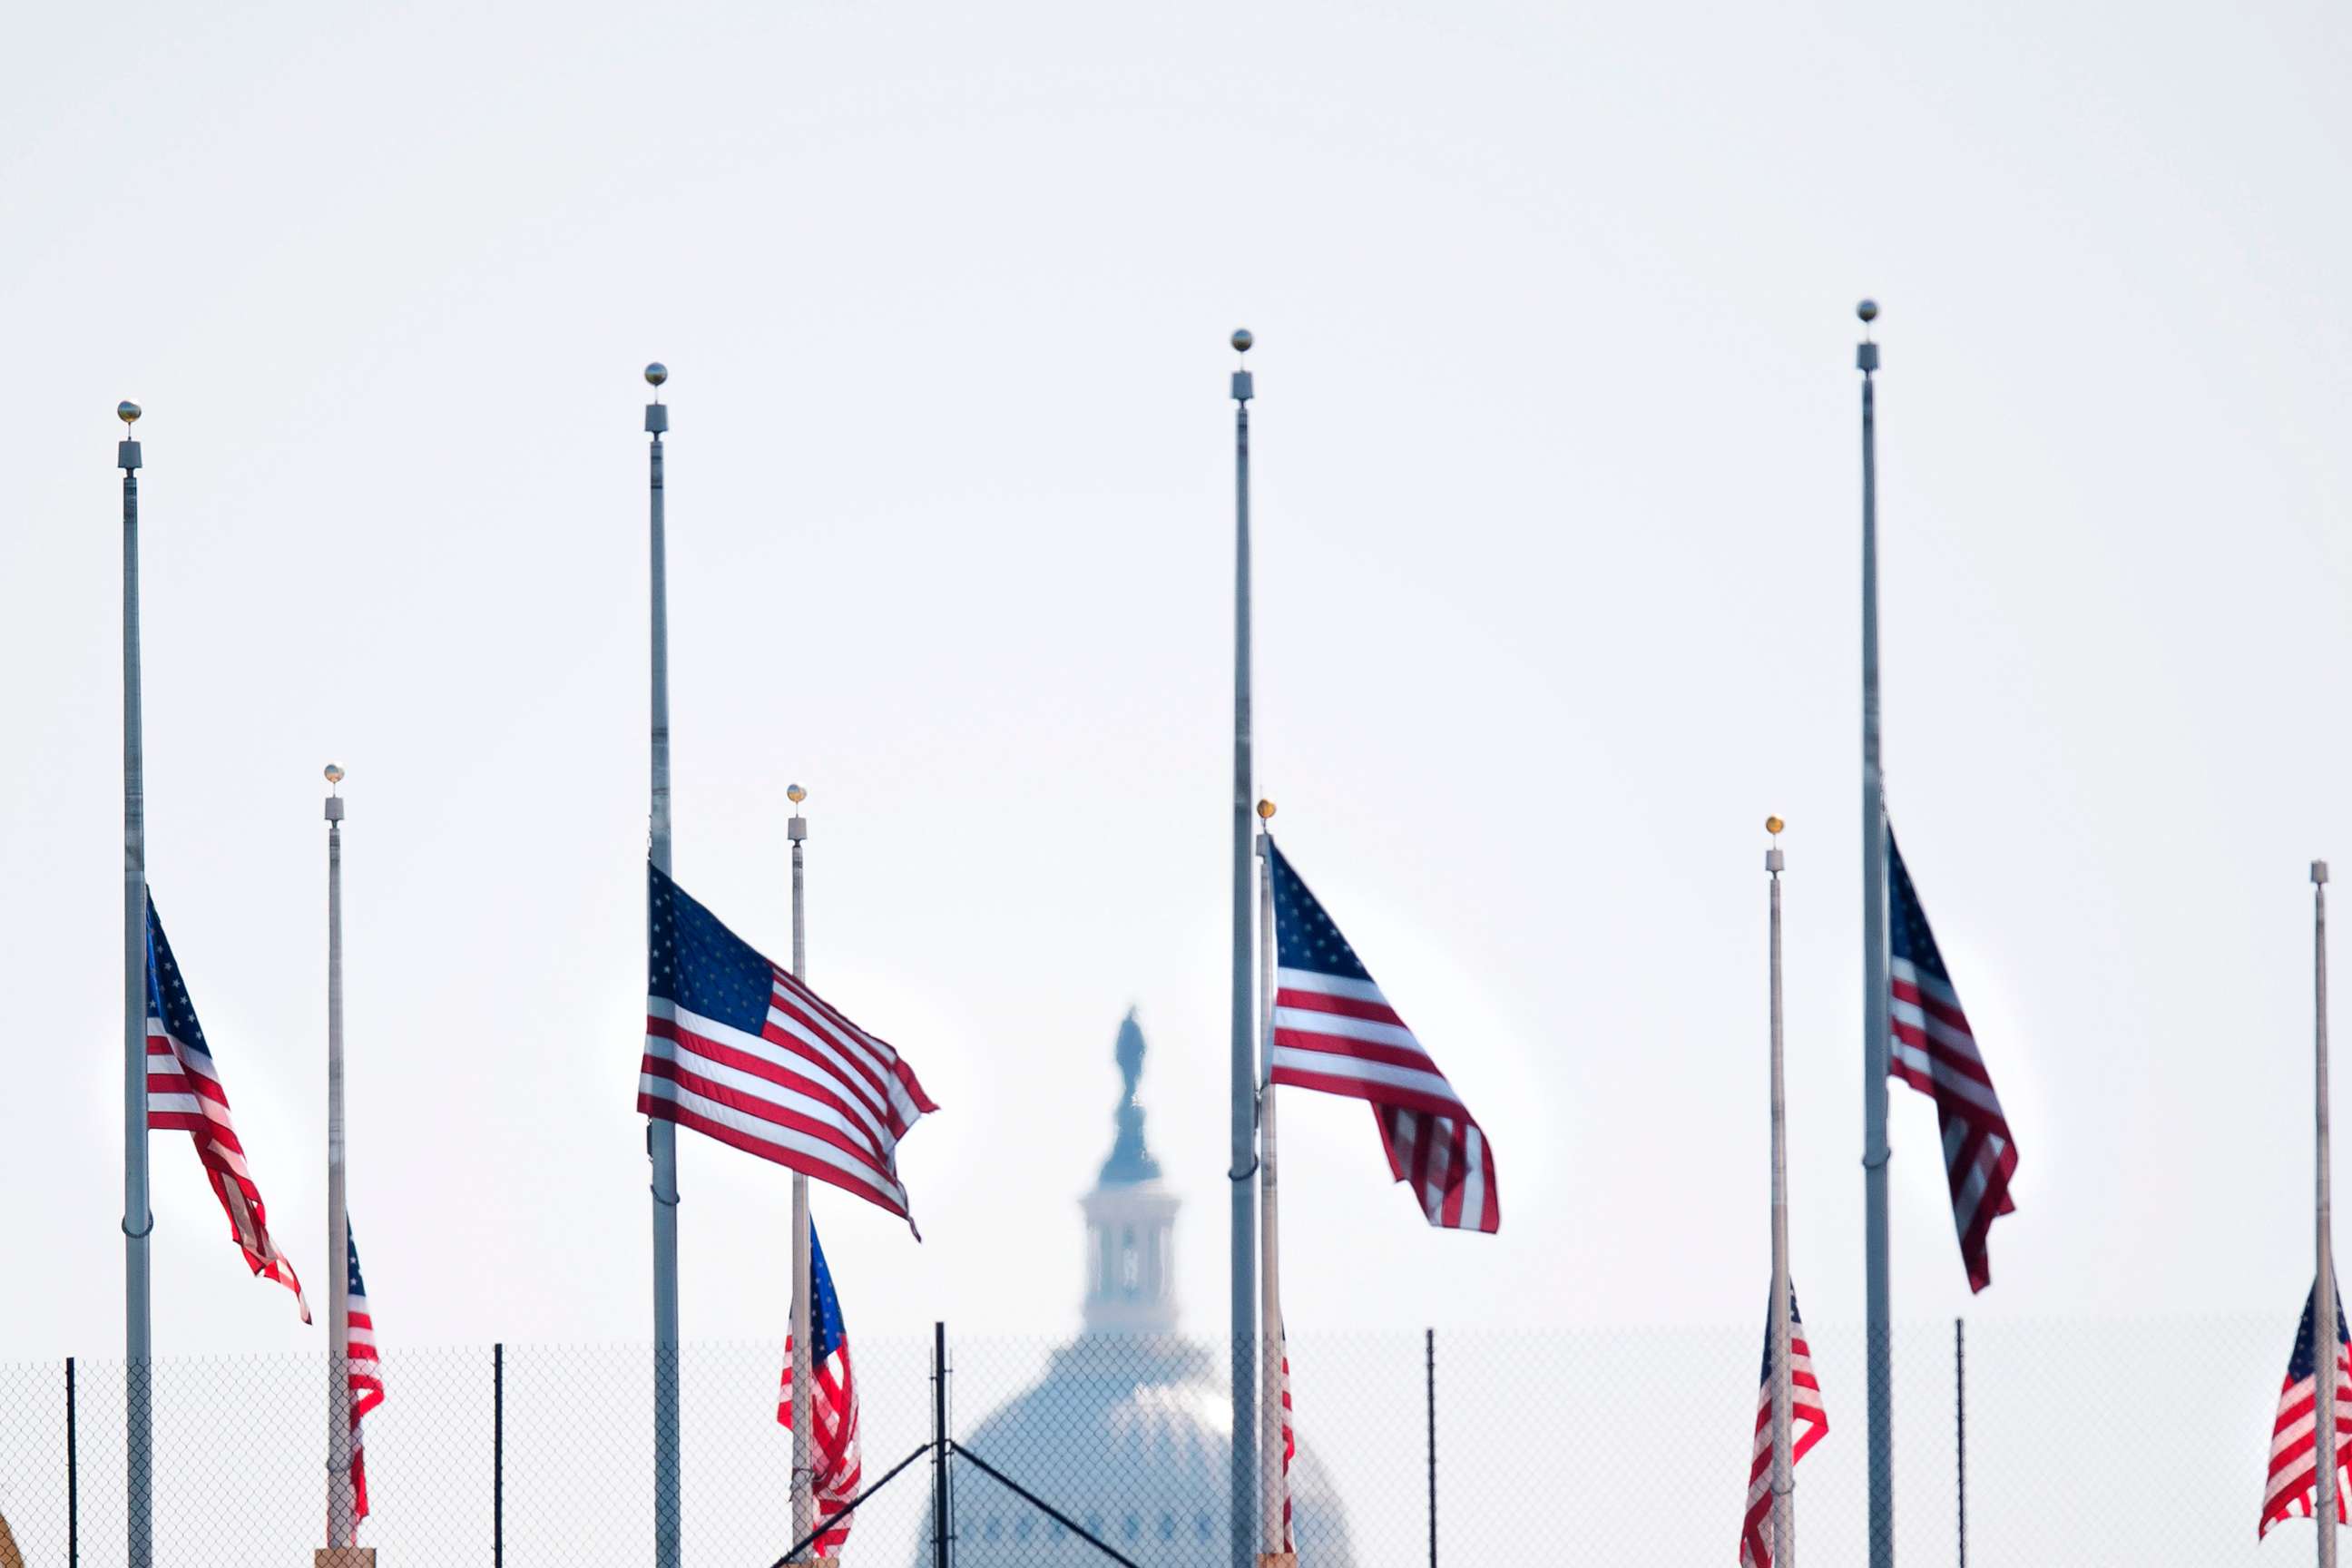 PHOTO: The American flag flies at half mast in Washington, D.C., on April 18, 2018, in honor of former First Lady Barbara Bush.